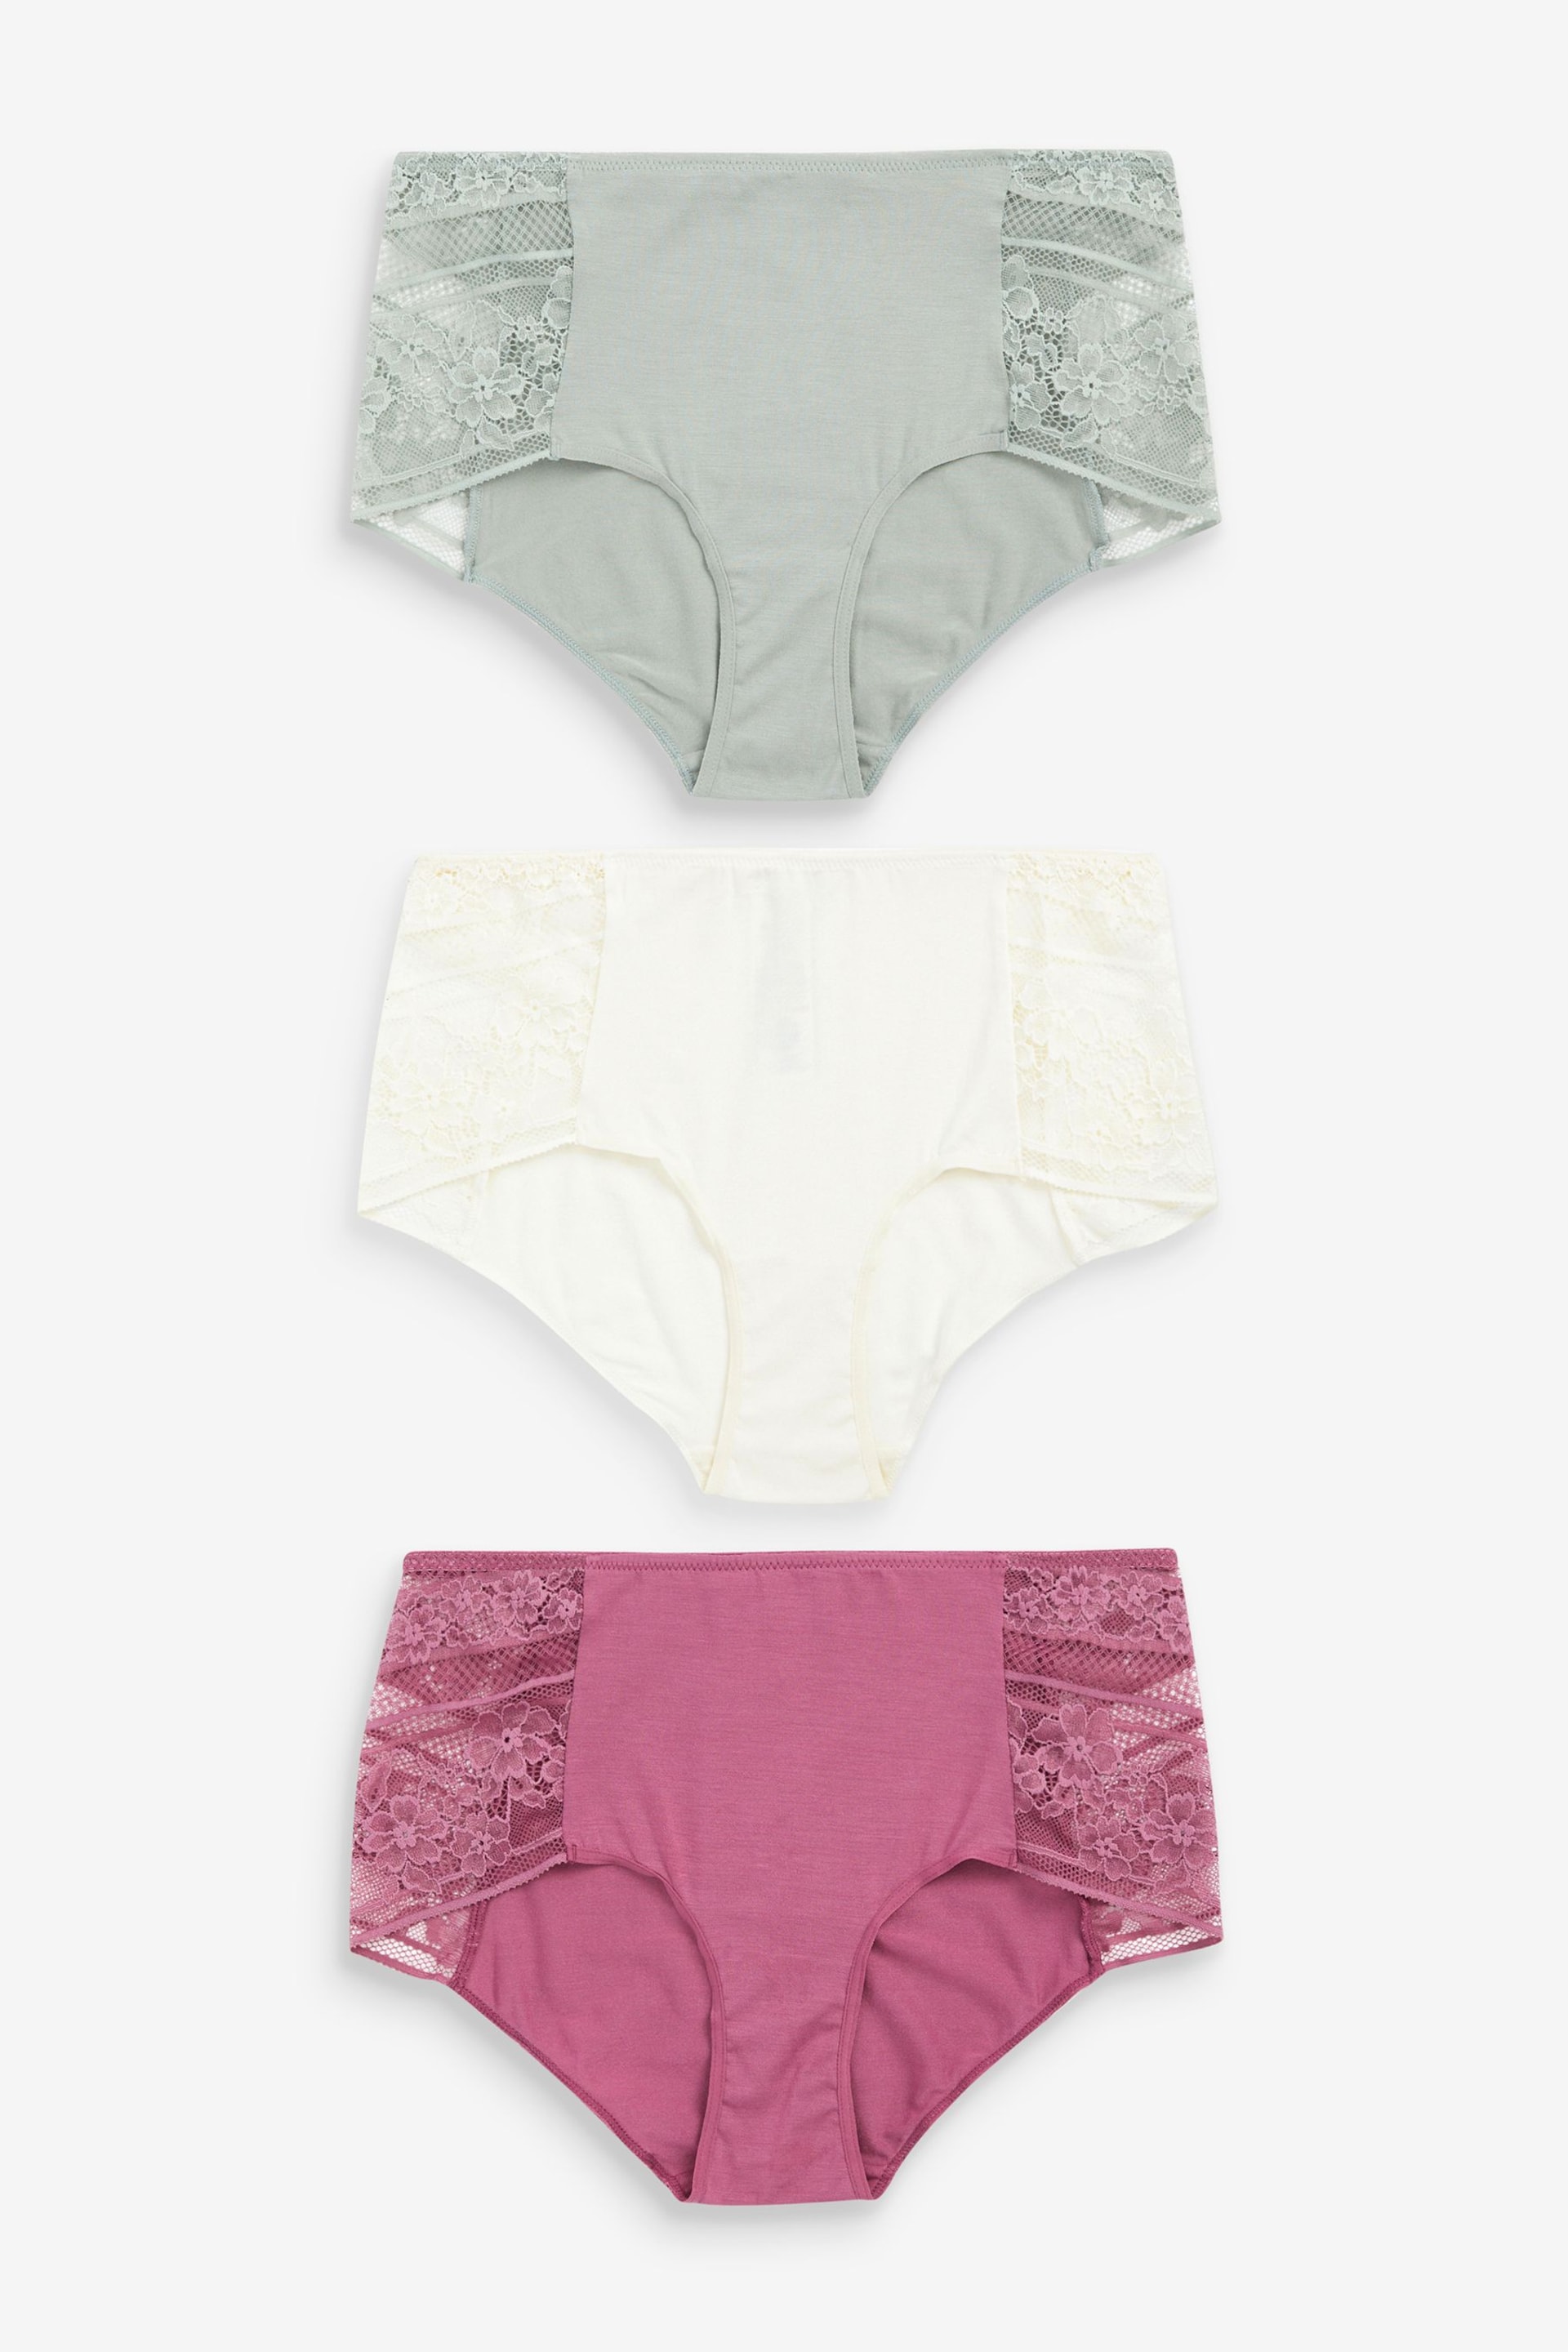 Cream/Pink/Sage Green Short Modal & Lace Knickers 3 Pack - Image 5 of 8